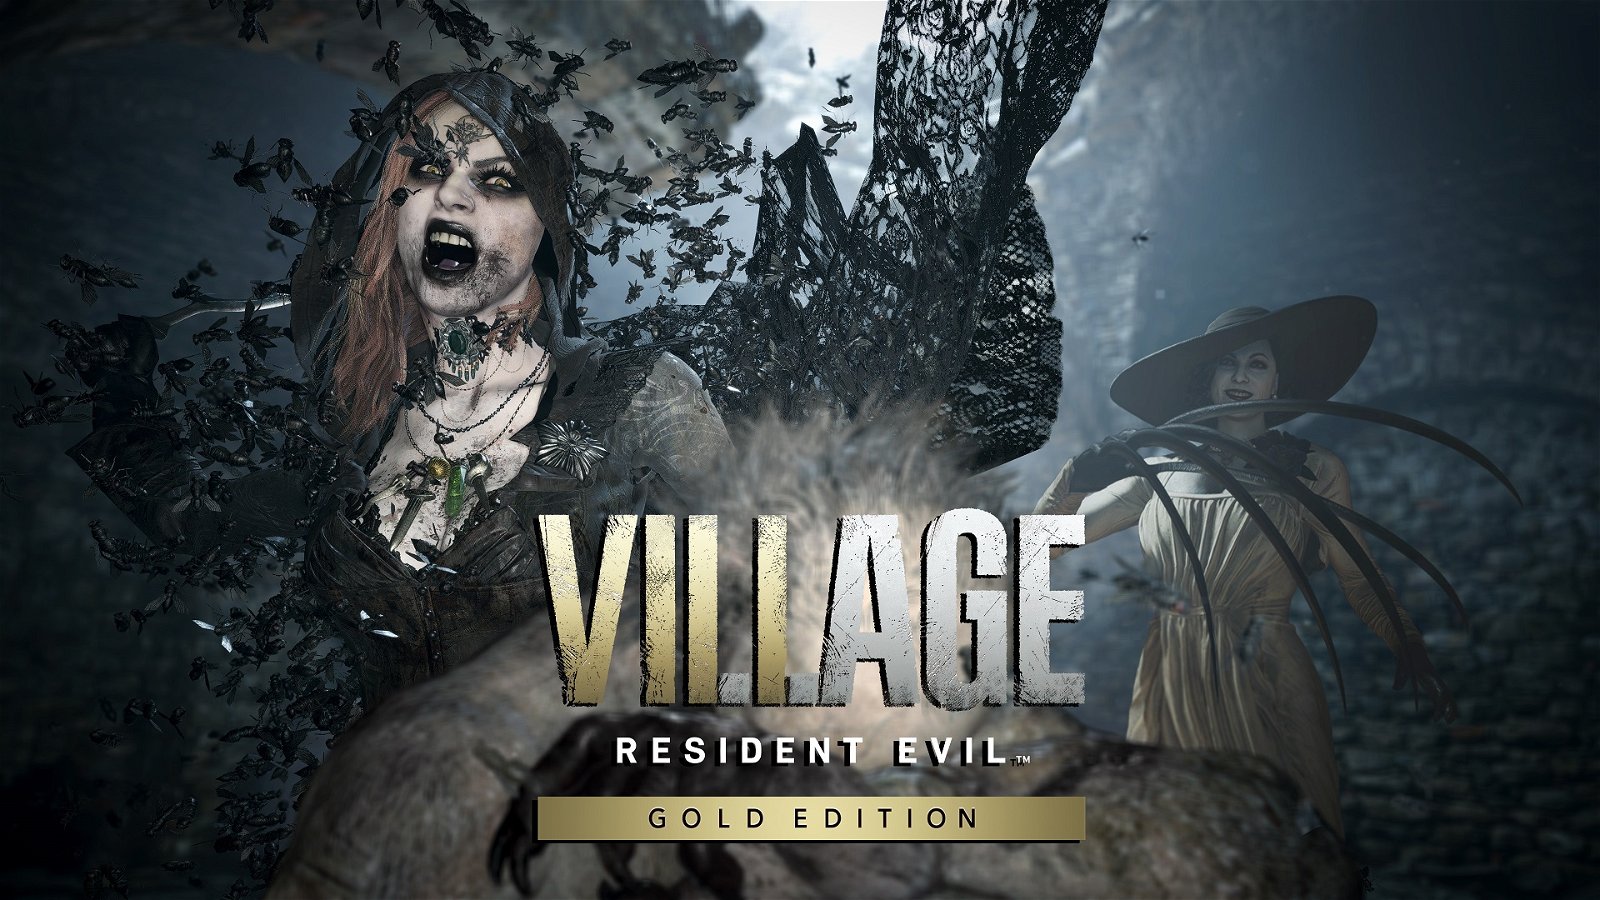 Resident Evil Village Gold Edition' release date, trailer, and